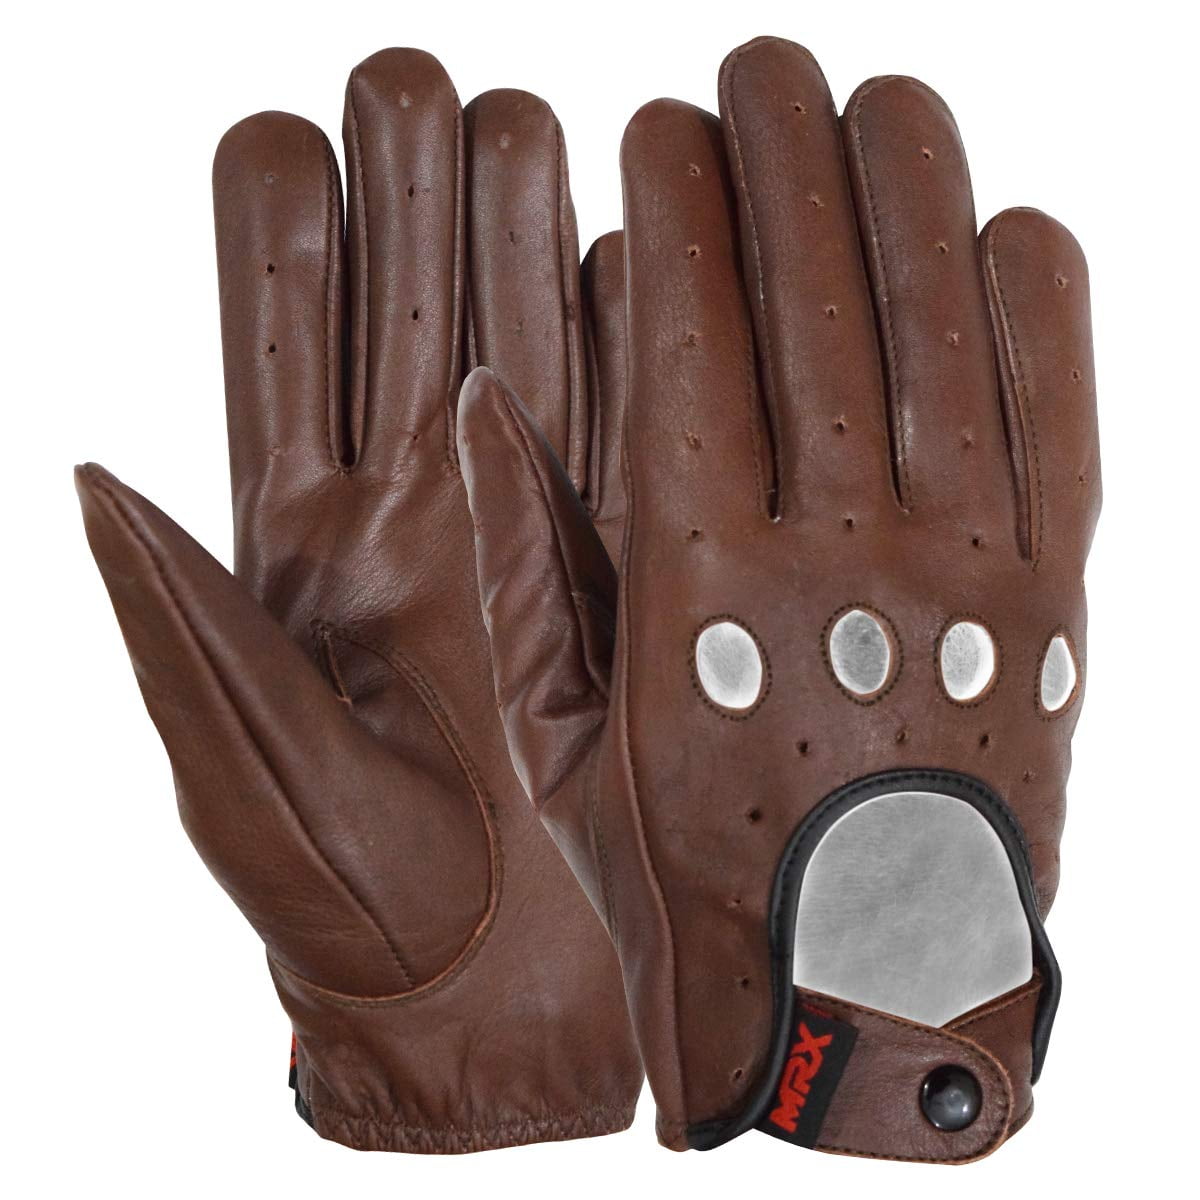 LEATHER GLOVES FULL FINGER CHAUFFEUR MOTORBIKE RIDING CAR BUS DRIVING GLOVE 